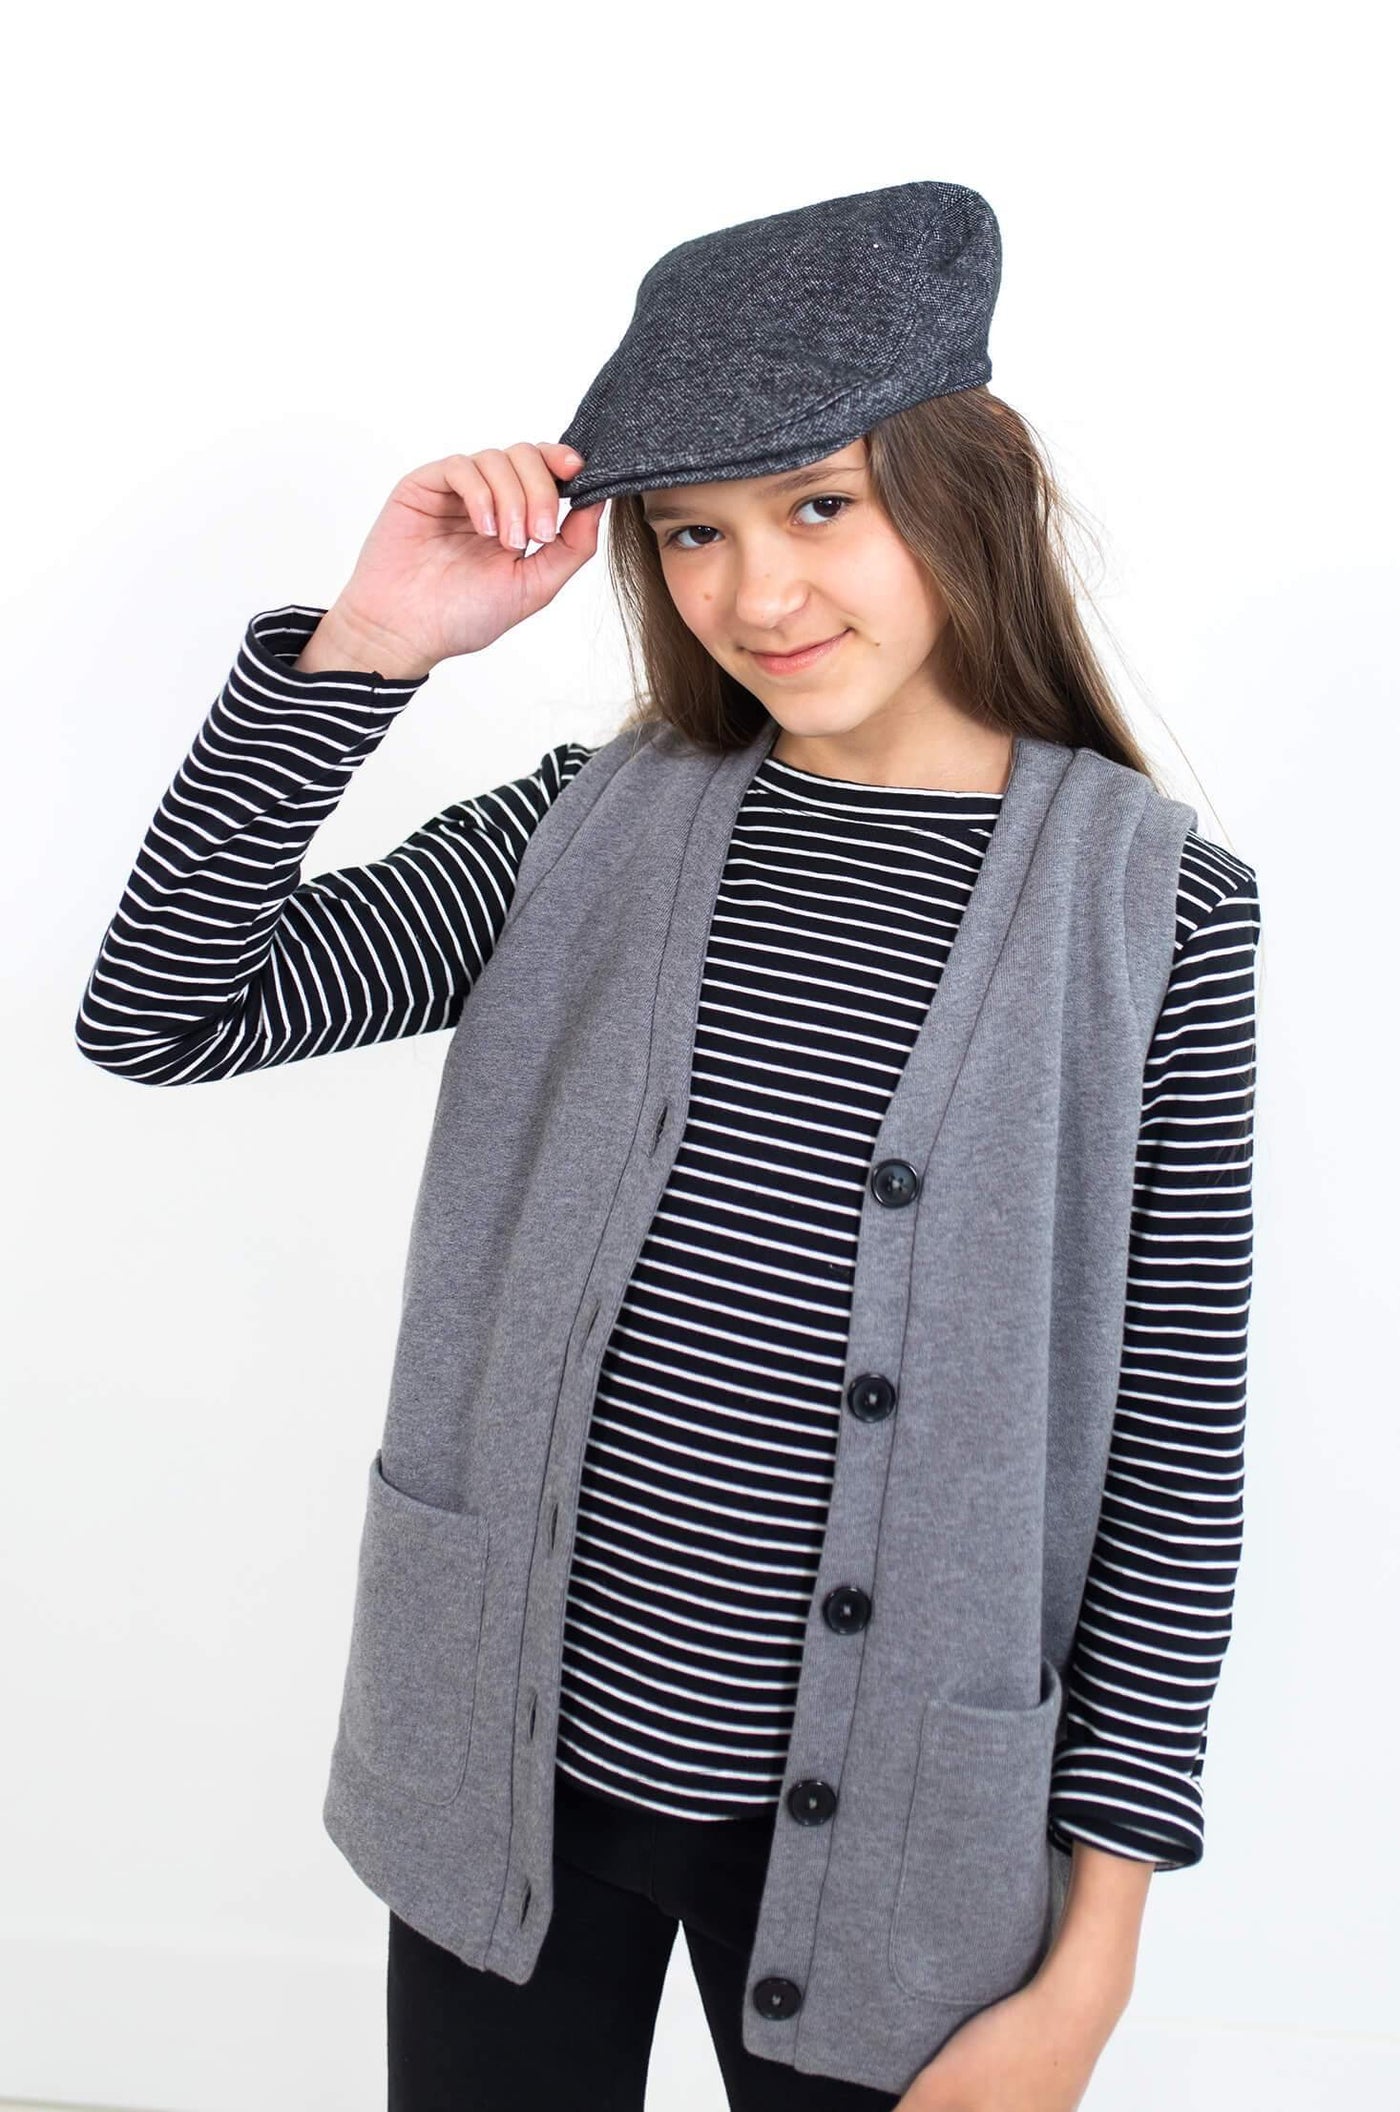 Girl wearing grey vest.  Ethically made with organic cotton.  Designed in Canada.